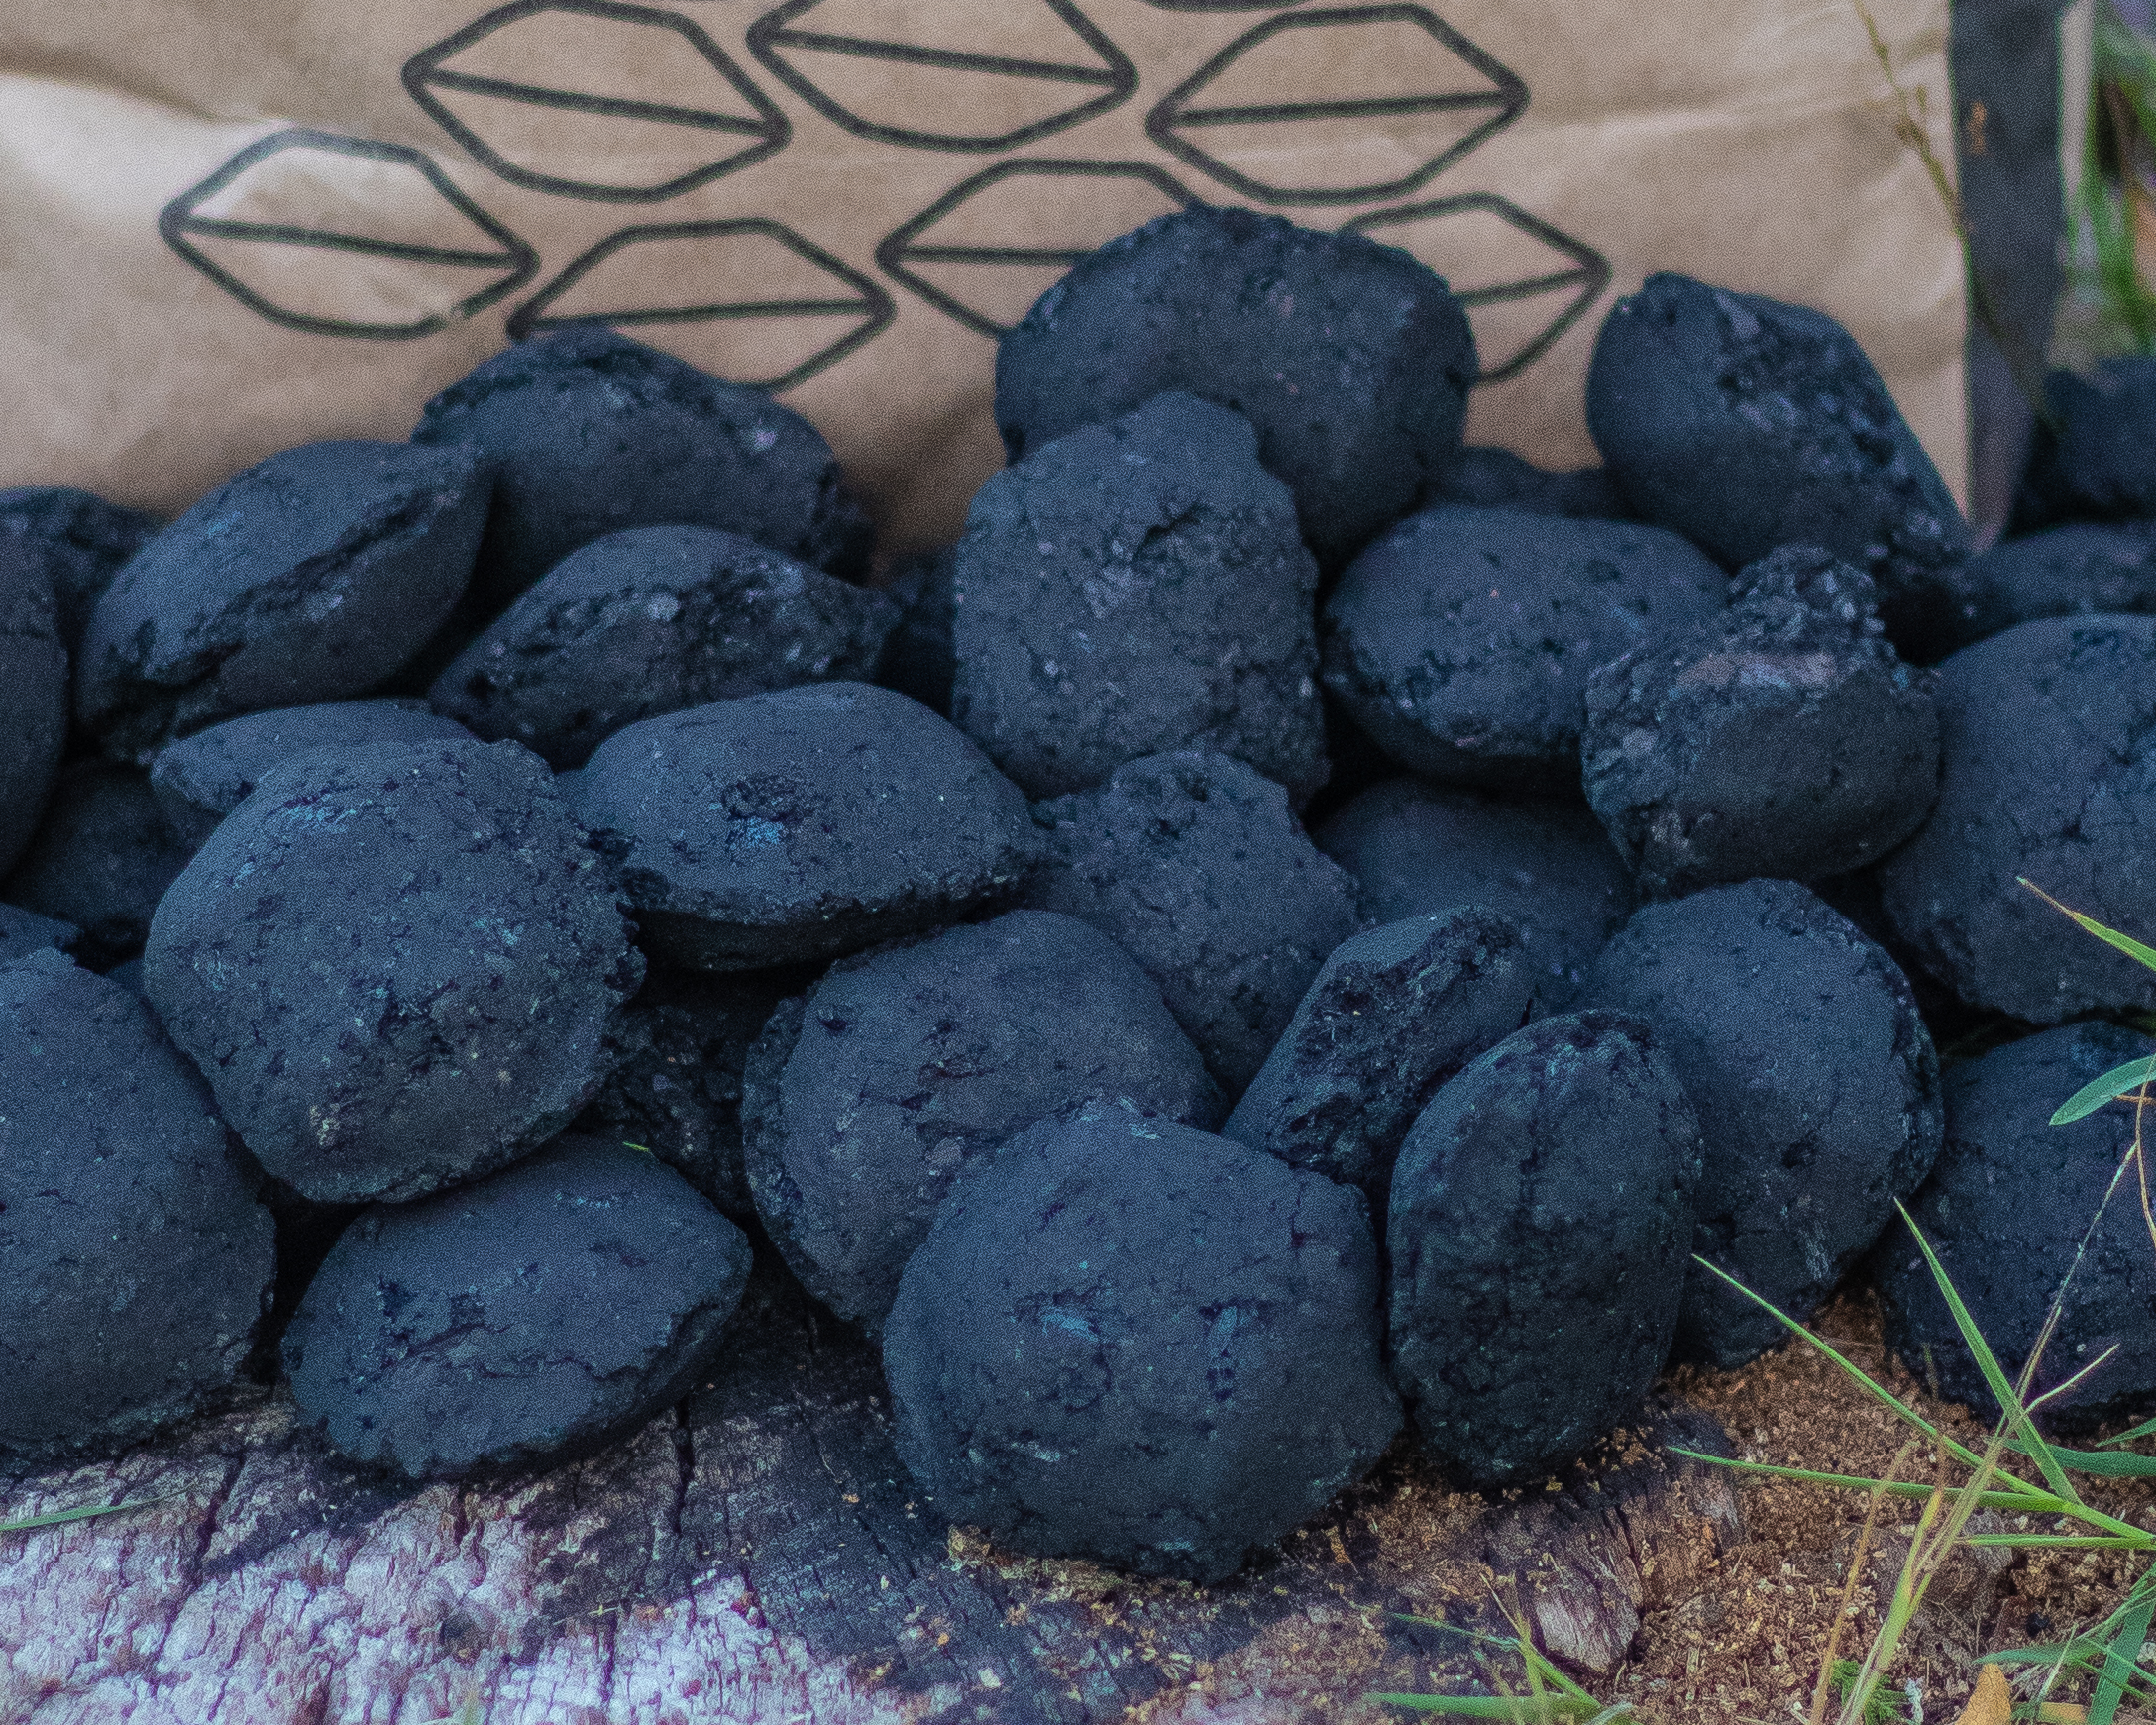 Young Kenyan Entrepreneurs Make Charcoal Briquettes From, 52% OFF